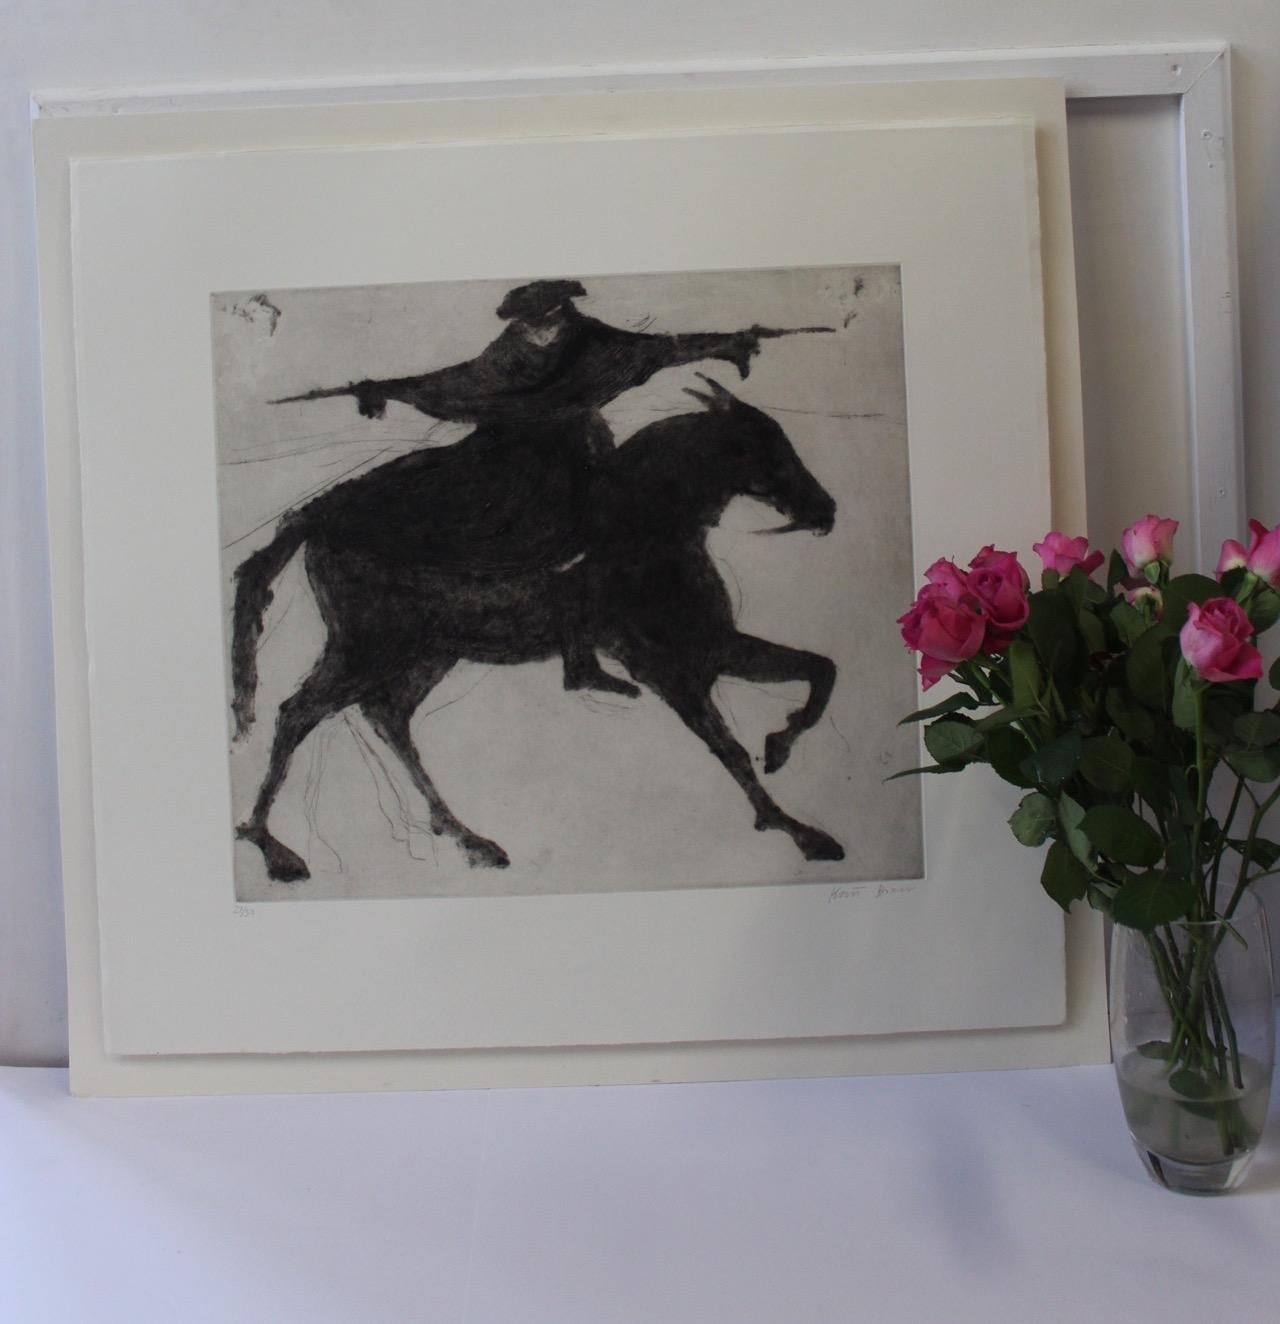 Kate Boxer, Dick Turpin On His Way To York, Contemporary Drypoint Print 1